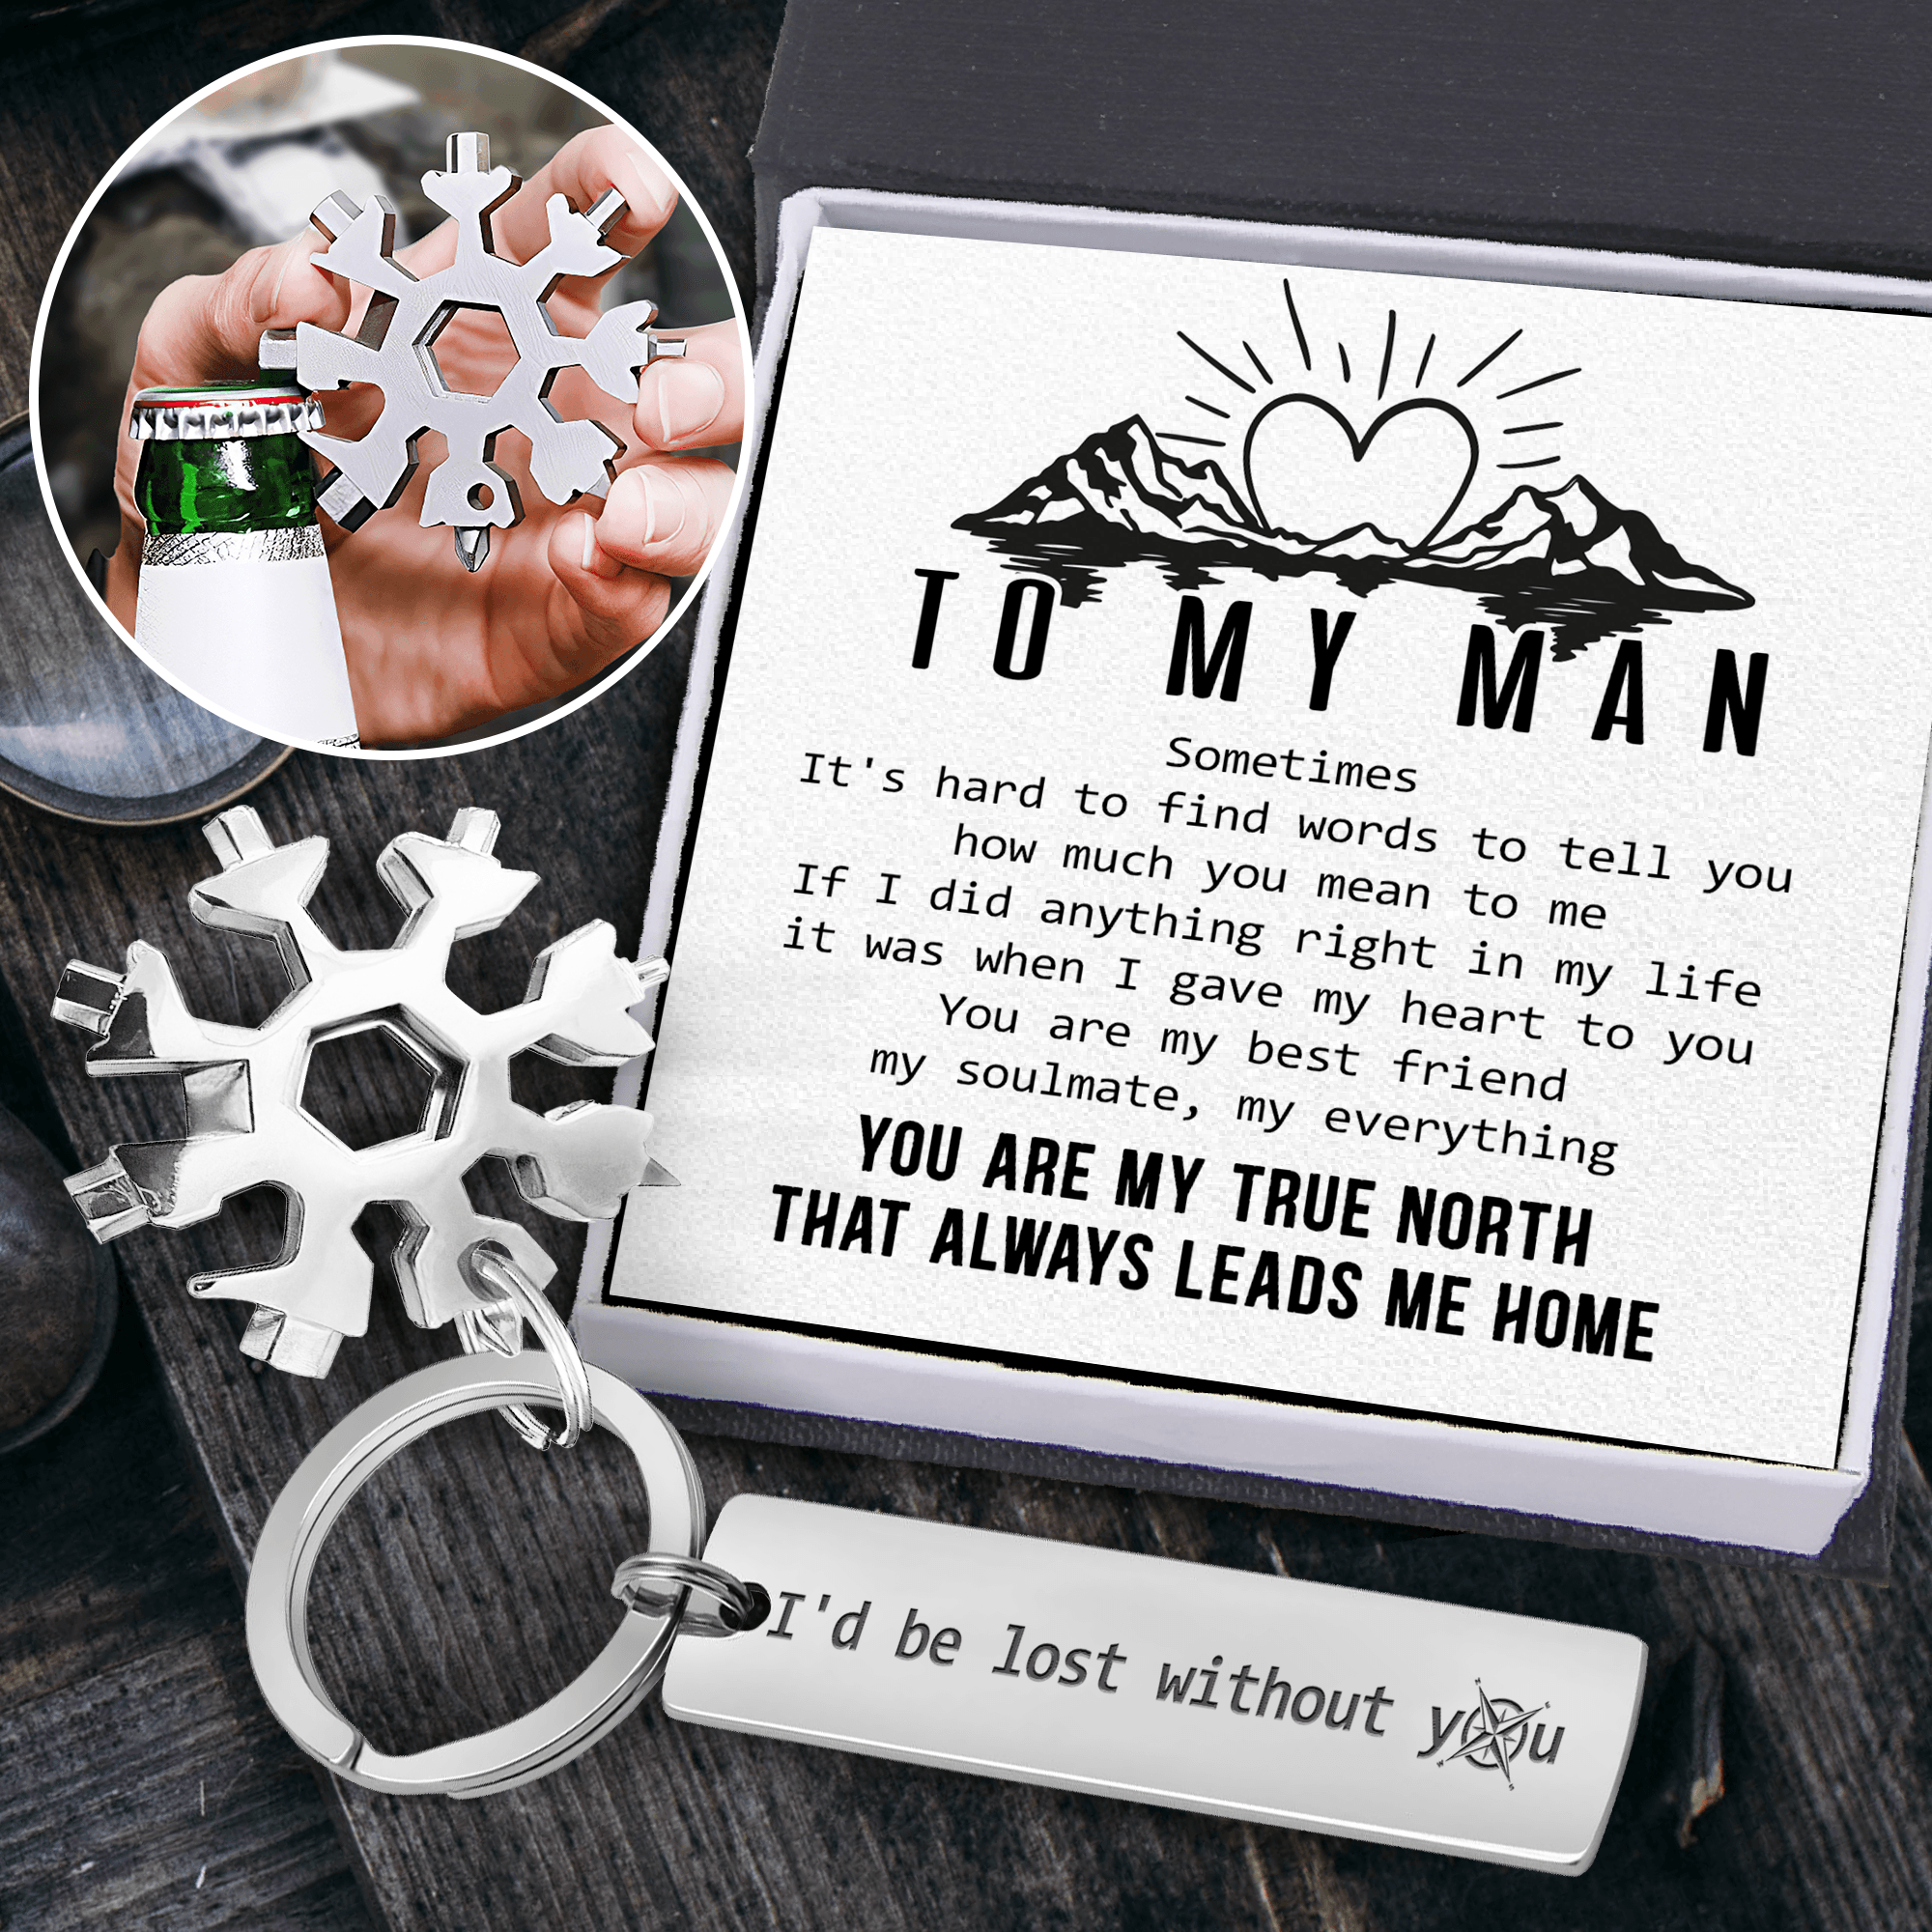 Outdoor Multitool Keychain - Hiking - To My Man - You Are My True North That Always Leads Me Home - Augktb26009 - Gifts Holder